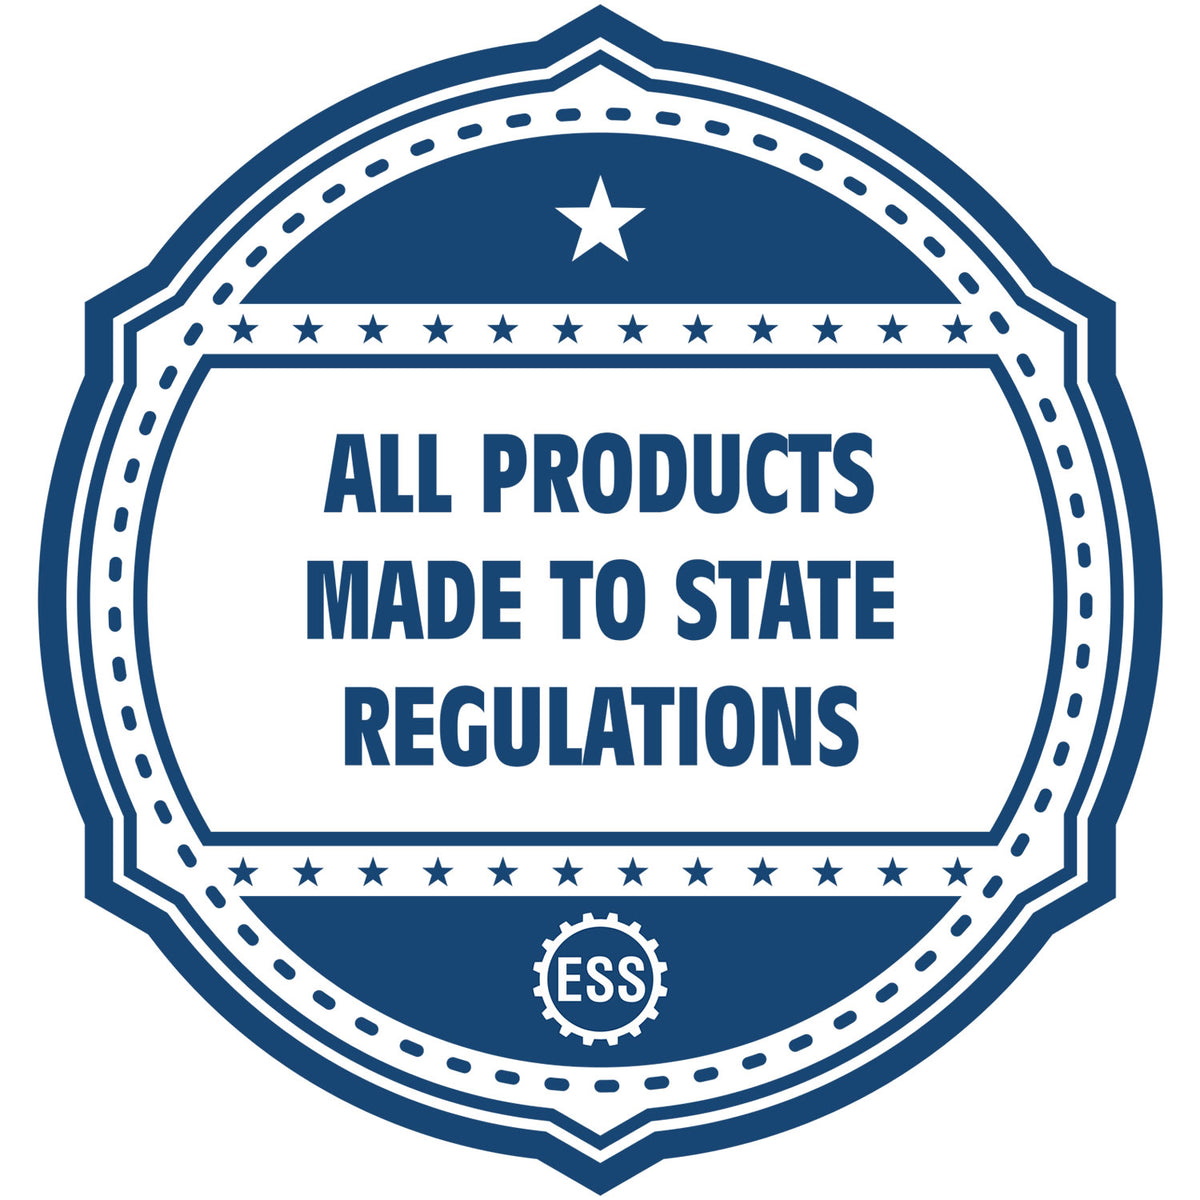 An icon or badge element for the Extended Long Reach West Virginia Architect Seal Embosser showing that this product is made in compliance with state regulations.